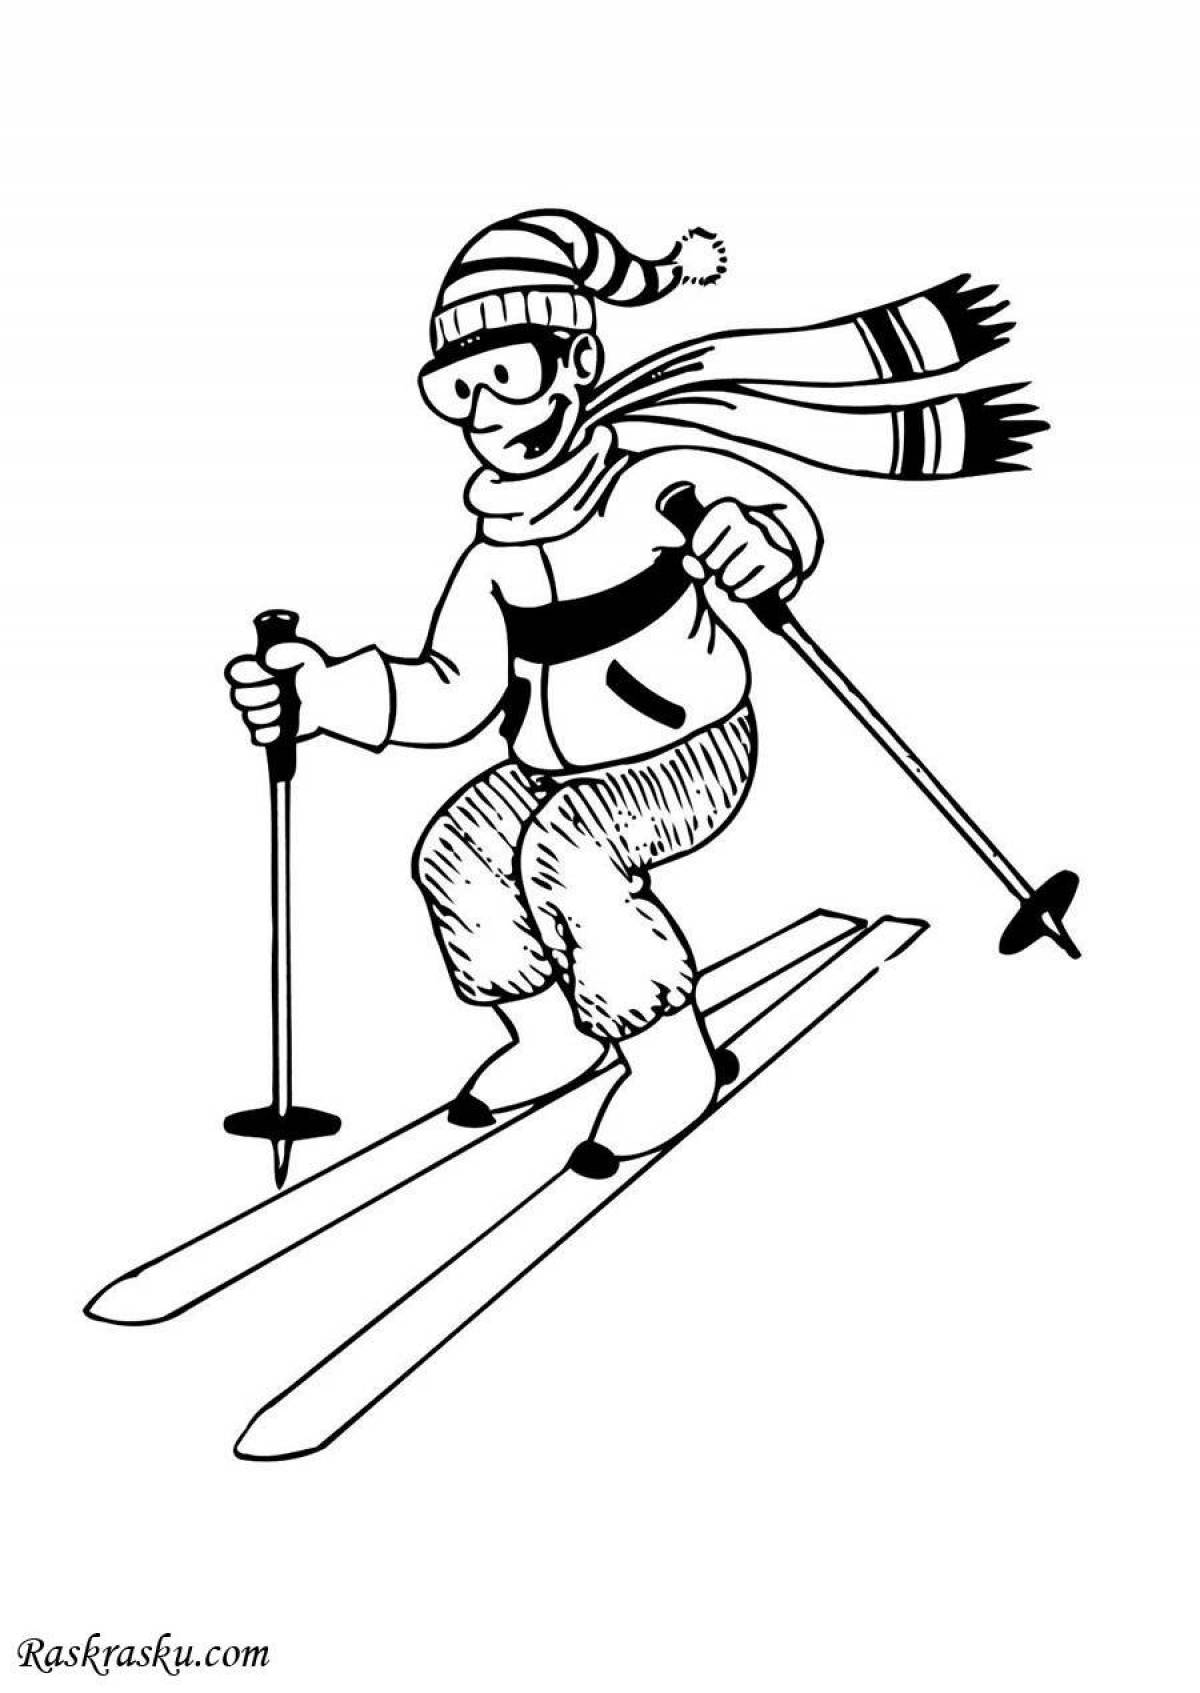 Colorful skier coloring page